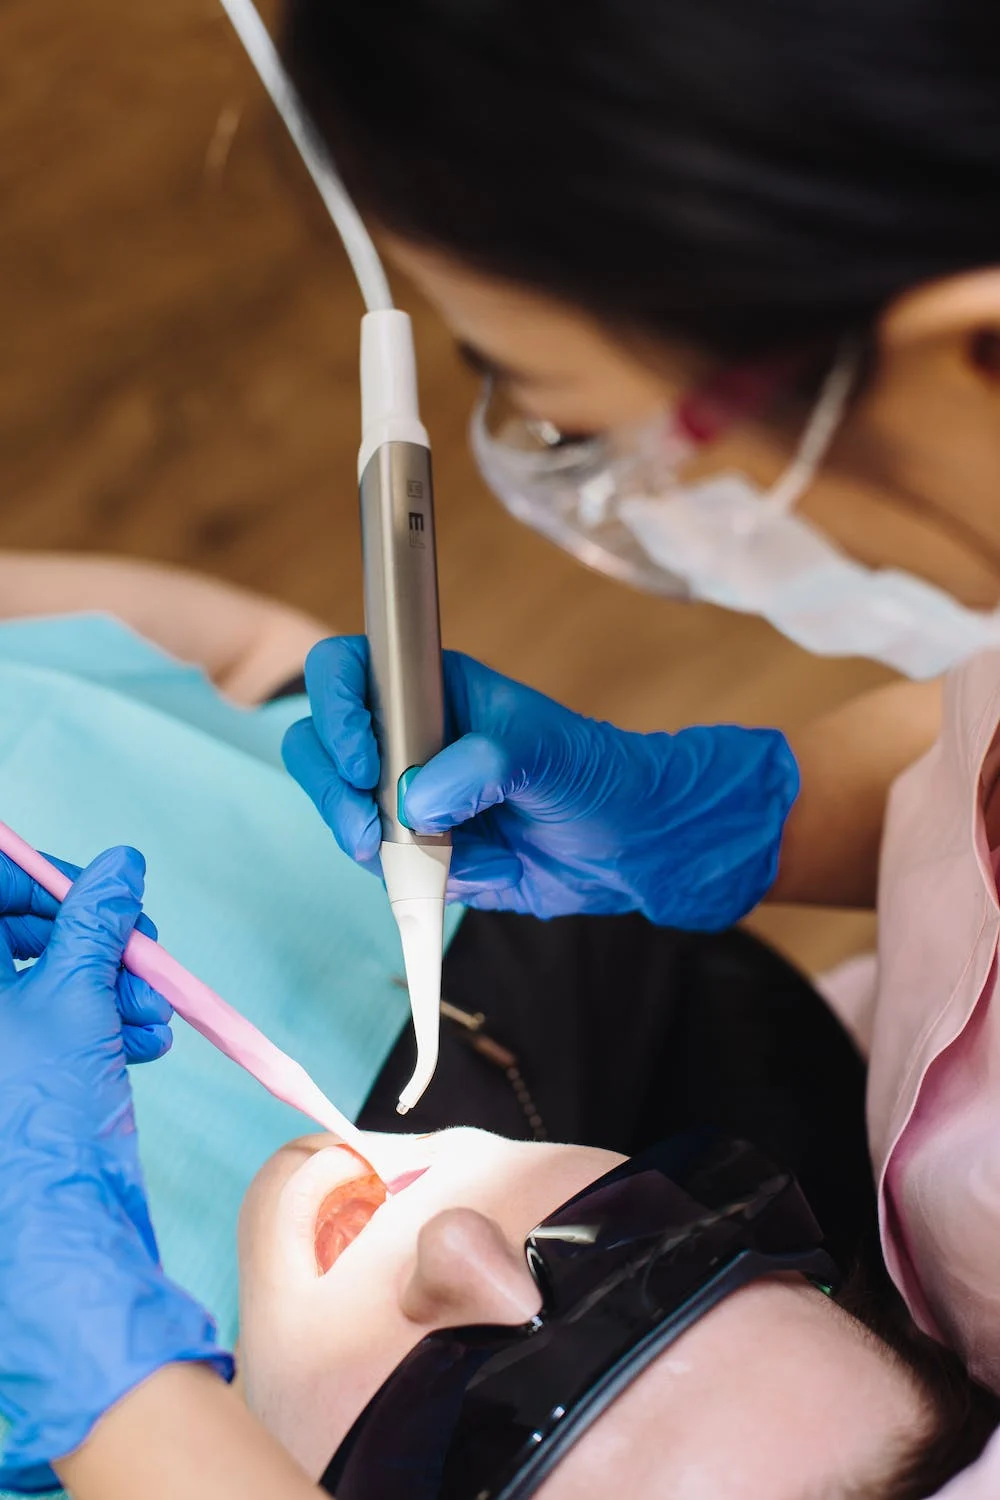 10 Questions to Ask When You’re Looking for a New Dentist